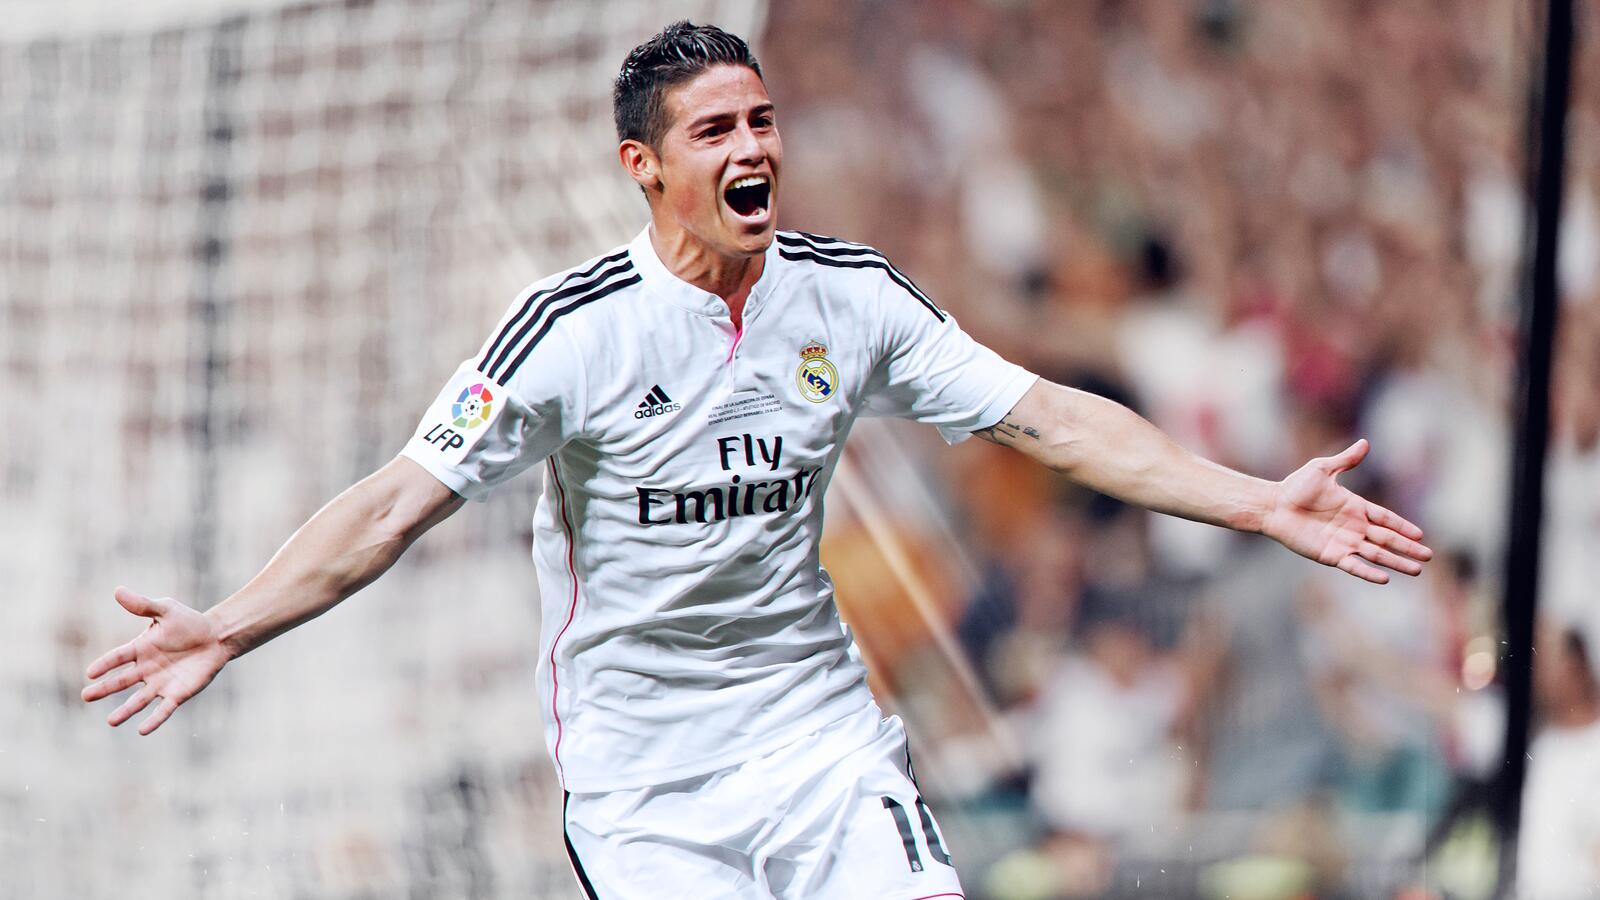 Wallpapers football wallpaper james rodriguez real madric cf on the desktop